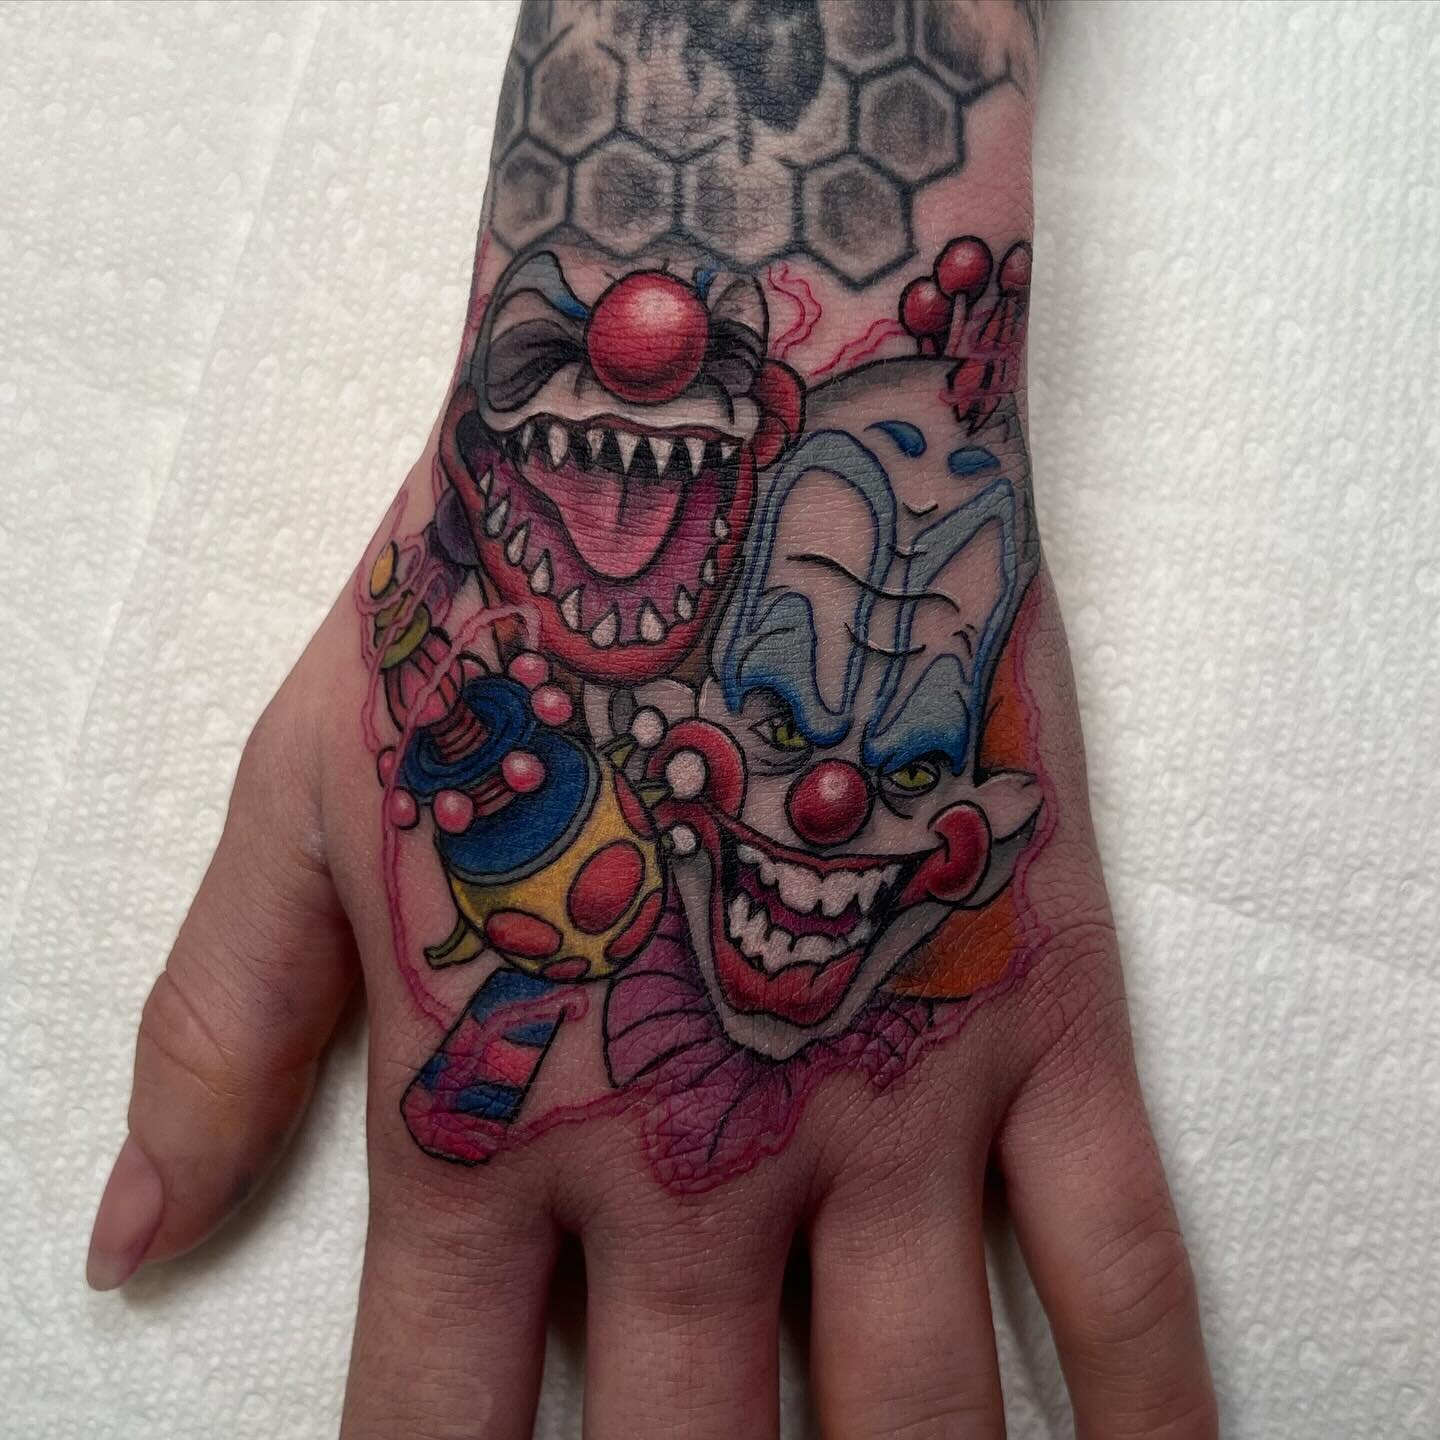 🤡🔪☄️ KILLER KLOWNS, FROM OUTER SPACE?! HOLY SHIT ☄️🔪🤡 

❤️&zwj;🔥❤️&zwj;🔥 @bpatry73 - thank you!!!!!! Killer idea, sick location and hella fkn fun to create ! Appreciate the trust on such a visible area 🙌🏻 

*** upper arm tattoos are not done 